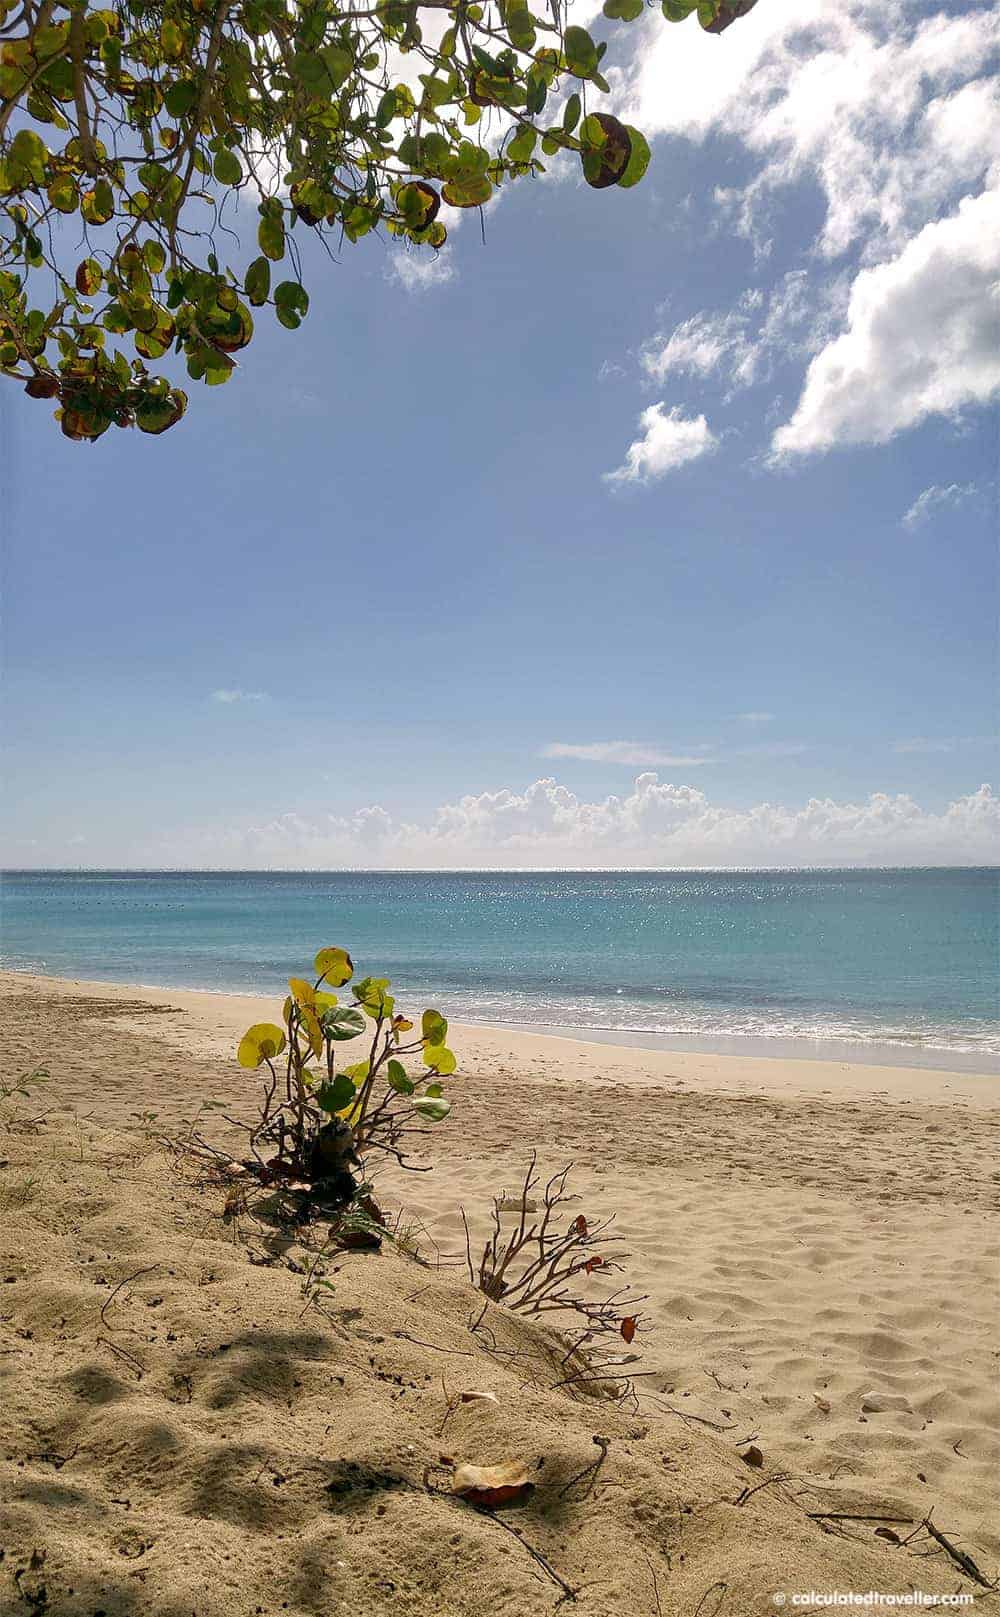 One Pristine Day at Turners Beach in Antigua. A how to guide for quiet on the beach. #beach #Antigua #Caribbean #cruise